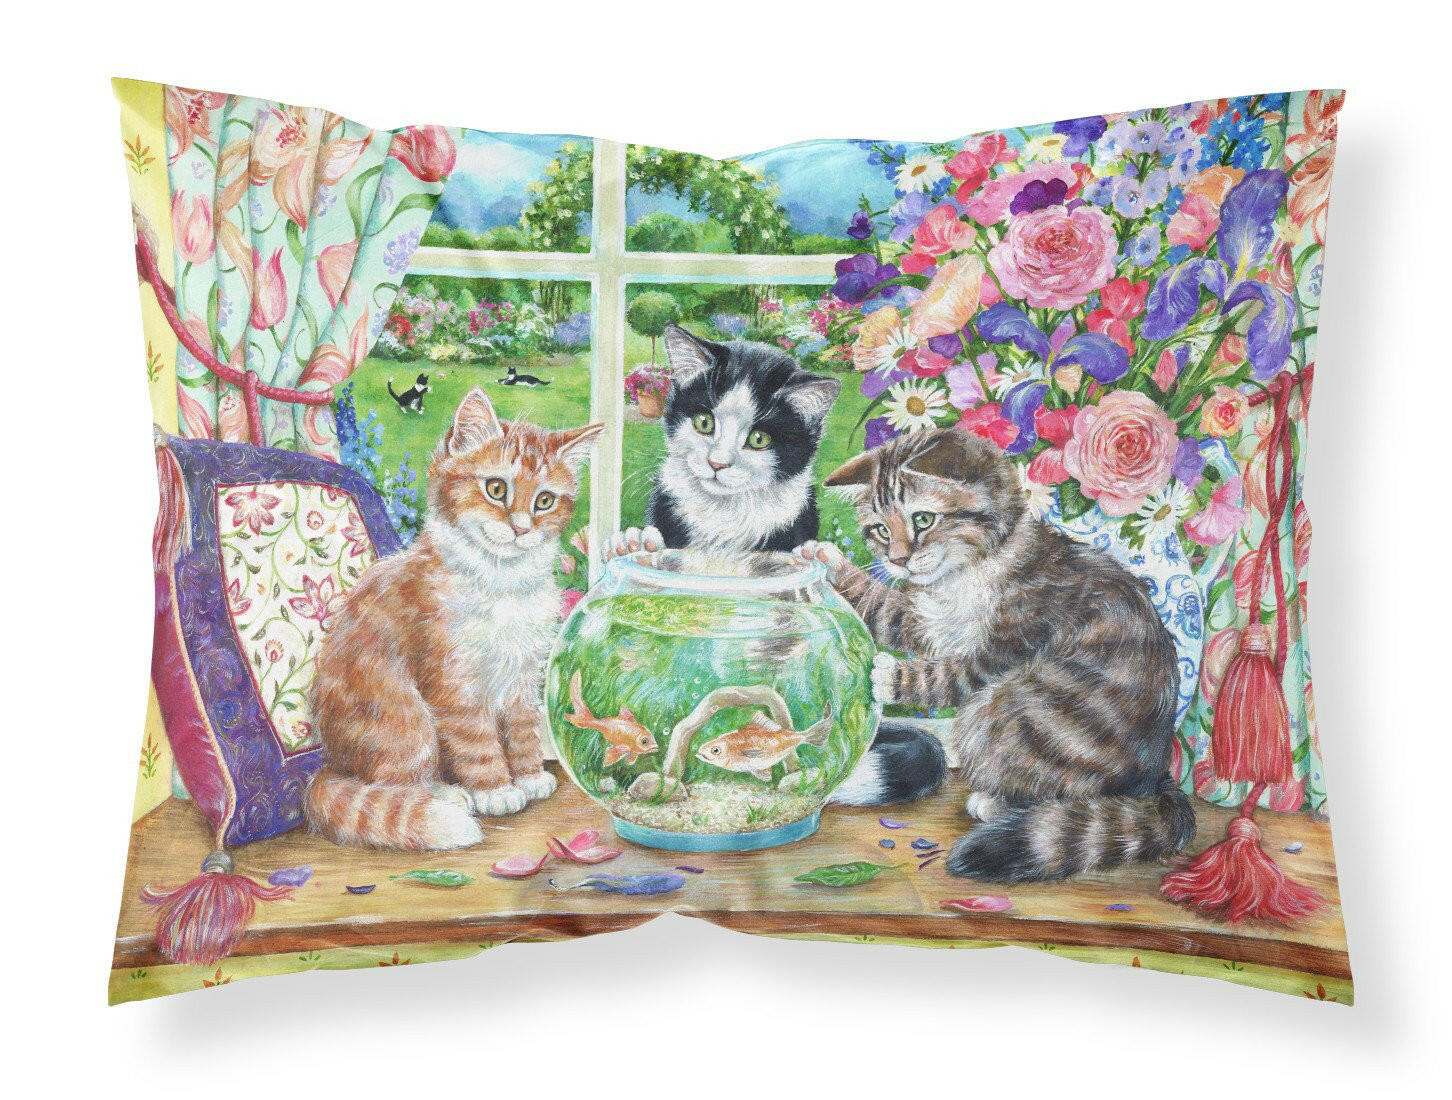 Cats Just Looking in the fish bowl Fabric Standard Pillowcase CDCO0325PILLOWCASE by Caroline's Treasures